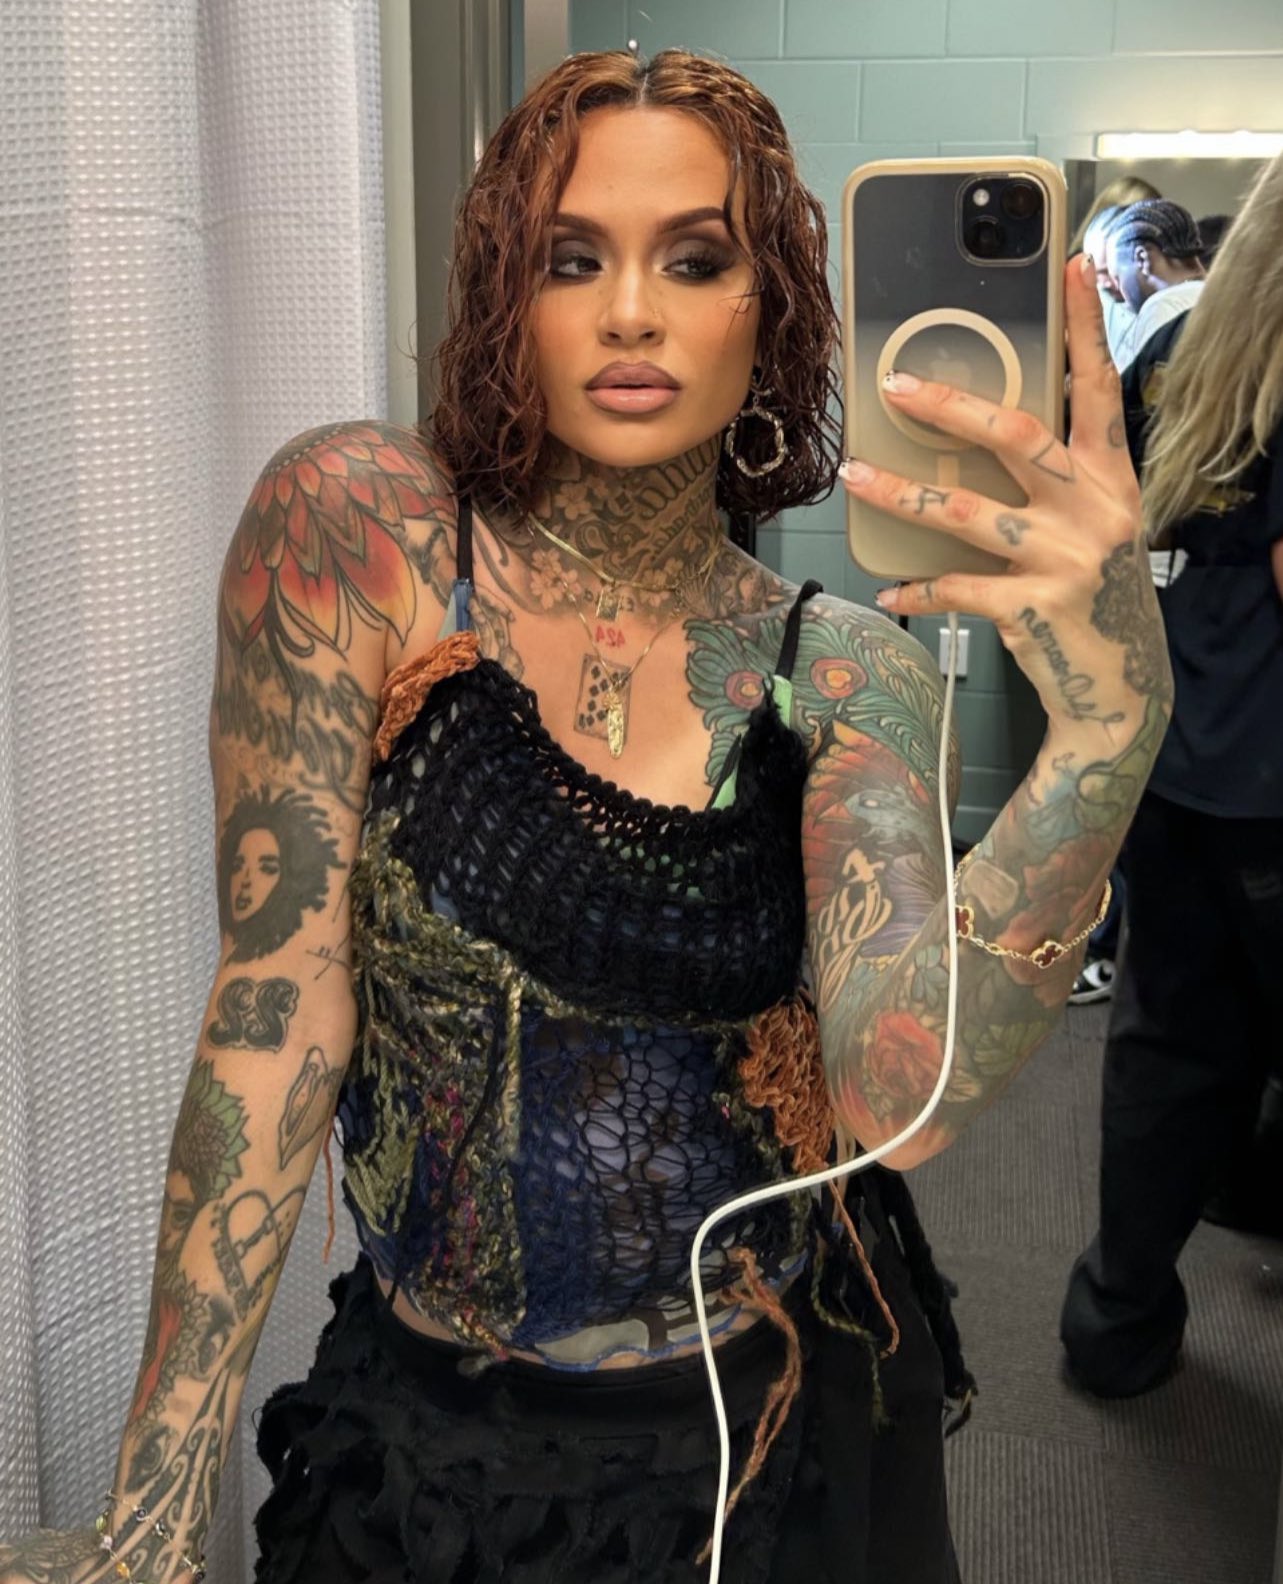 Kehlani's birth chart shows her sun in Taurus, moon in Pisces, and rising in Cancer.